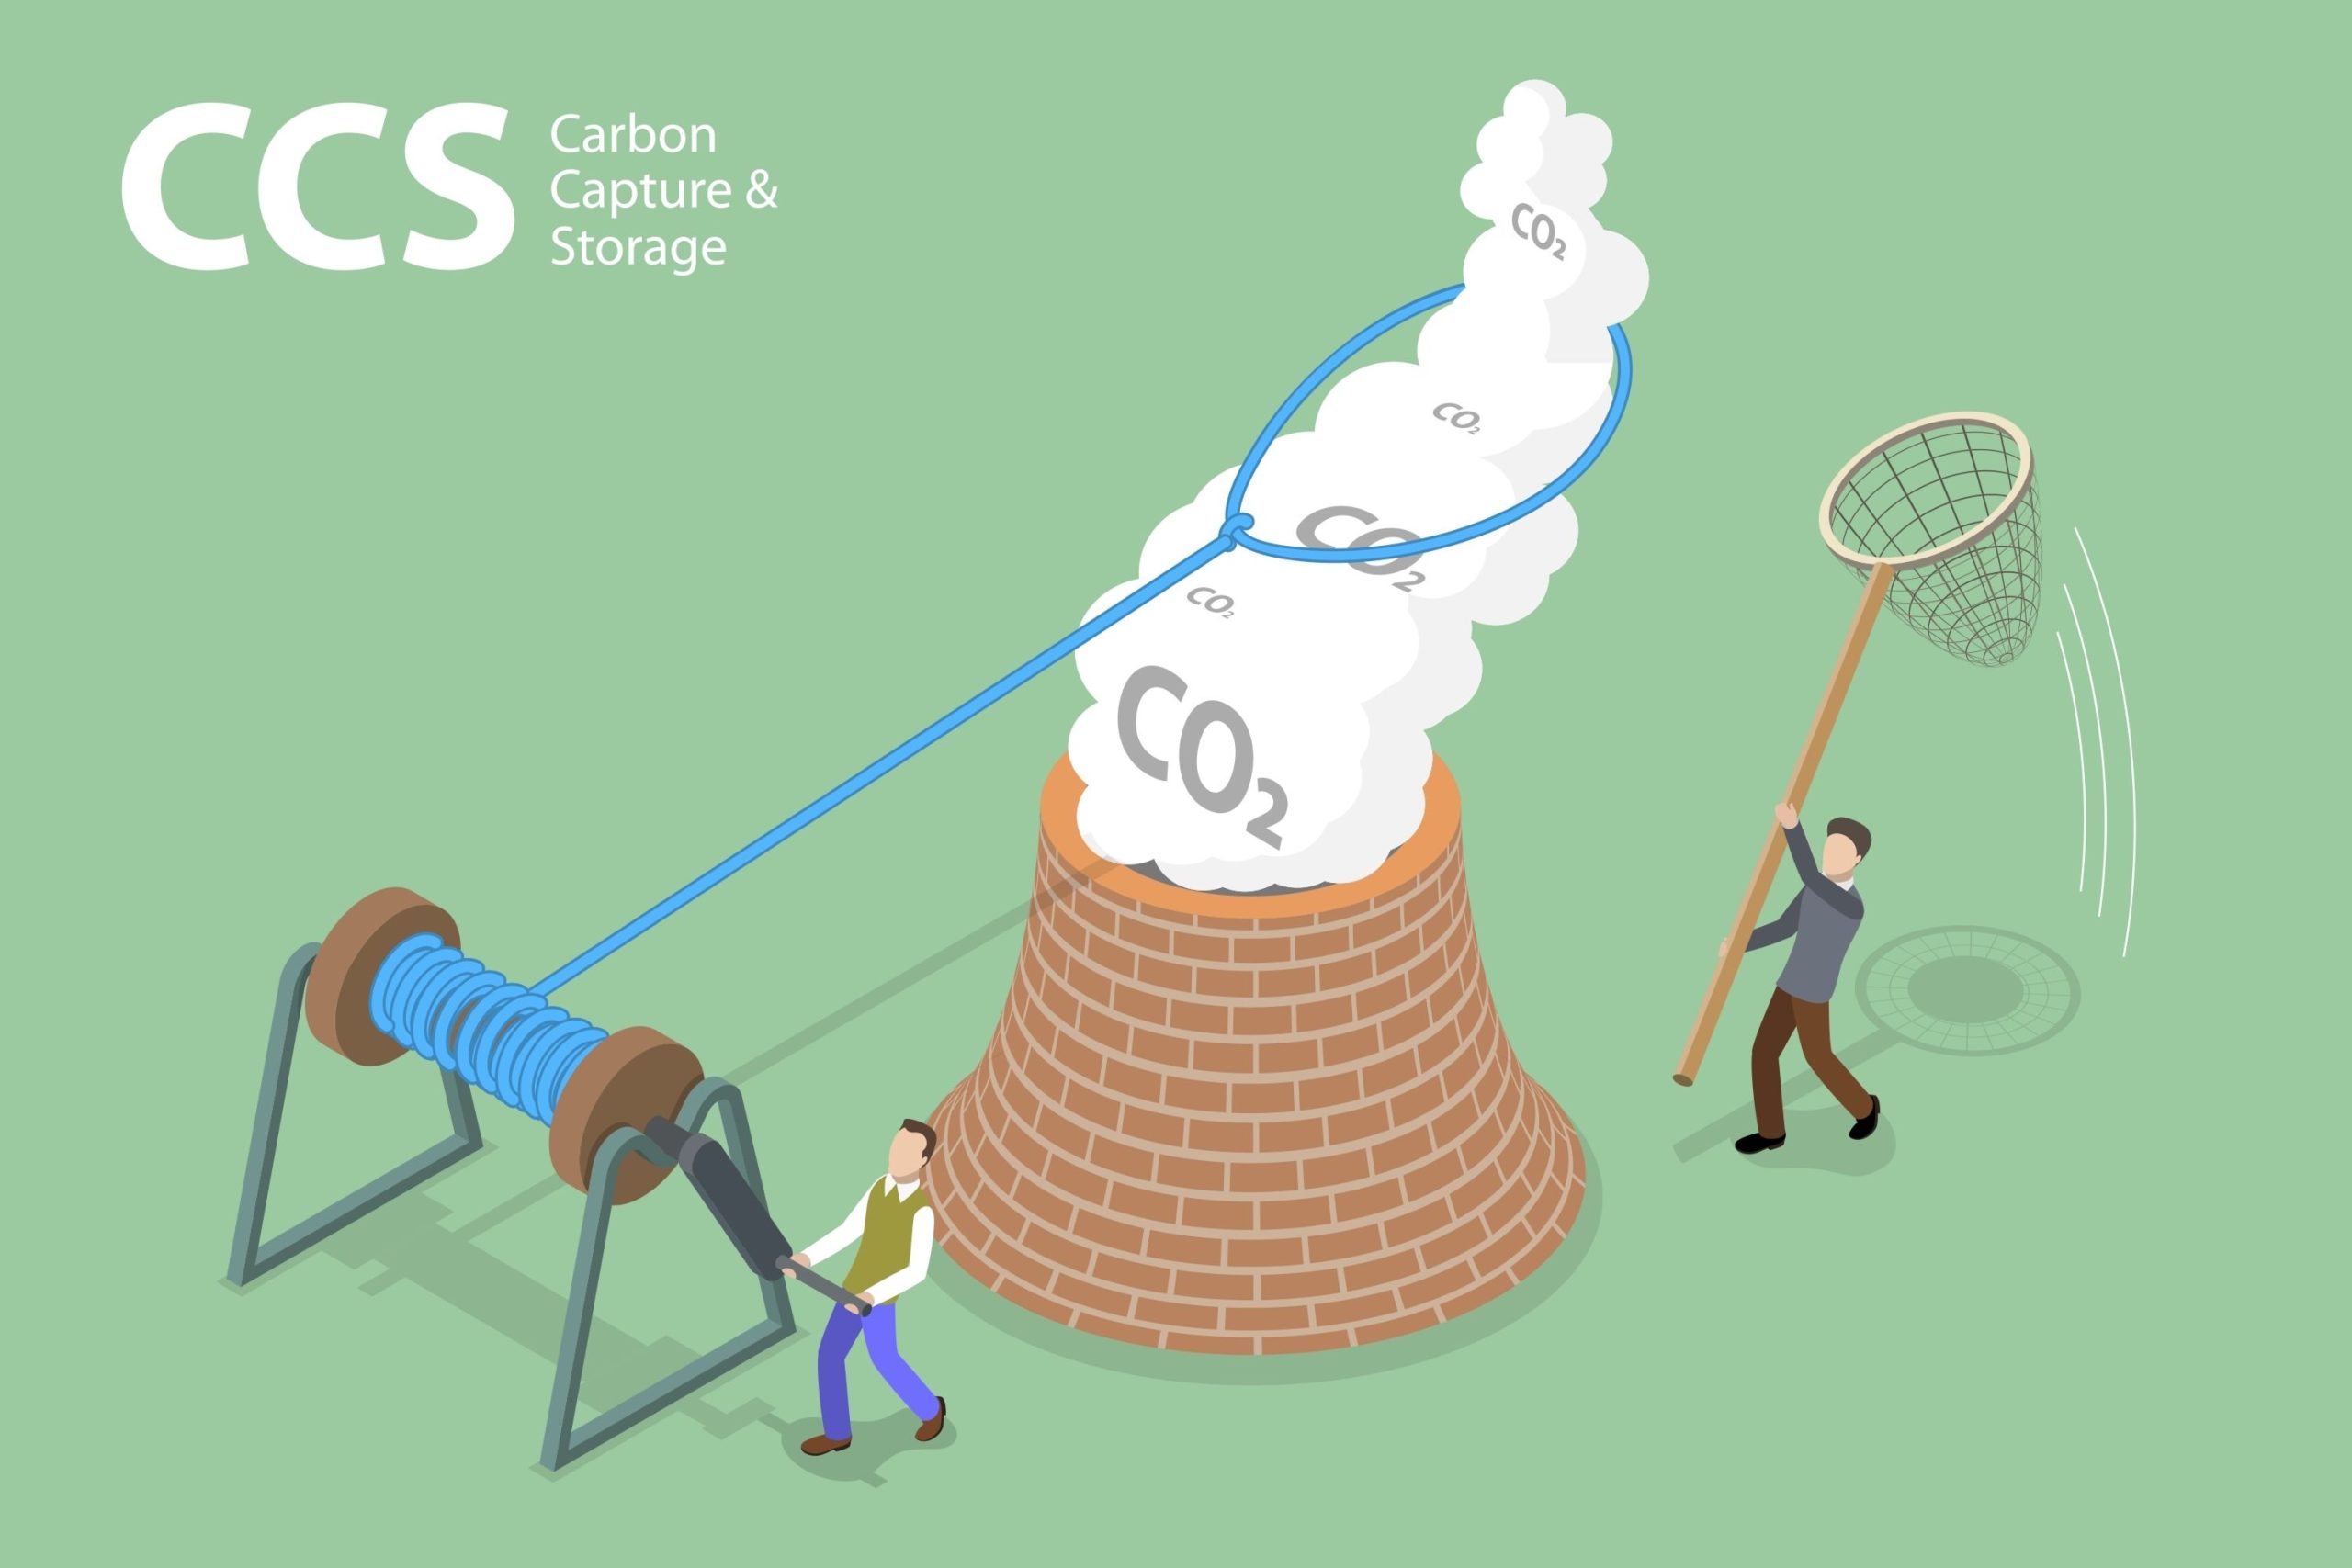 Illustration: One man tries to reel smoke labeled "CO2" in on a string, while another chases it with a porous net. (Shutterstock)